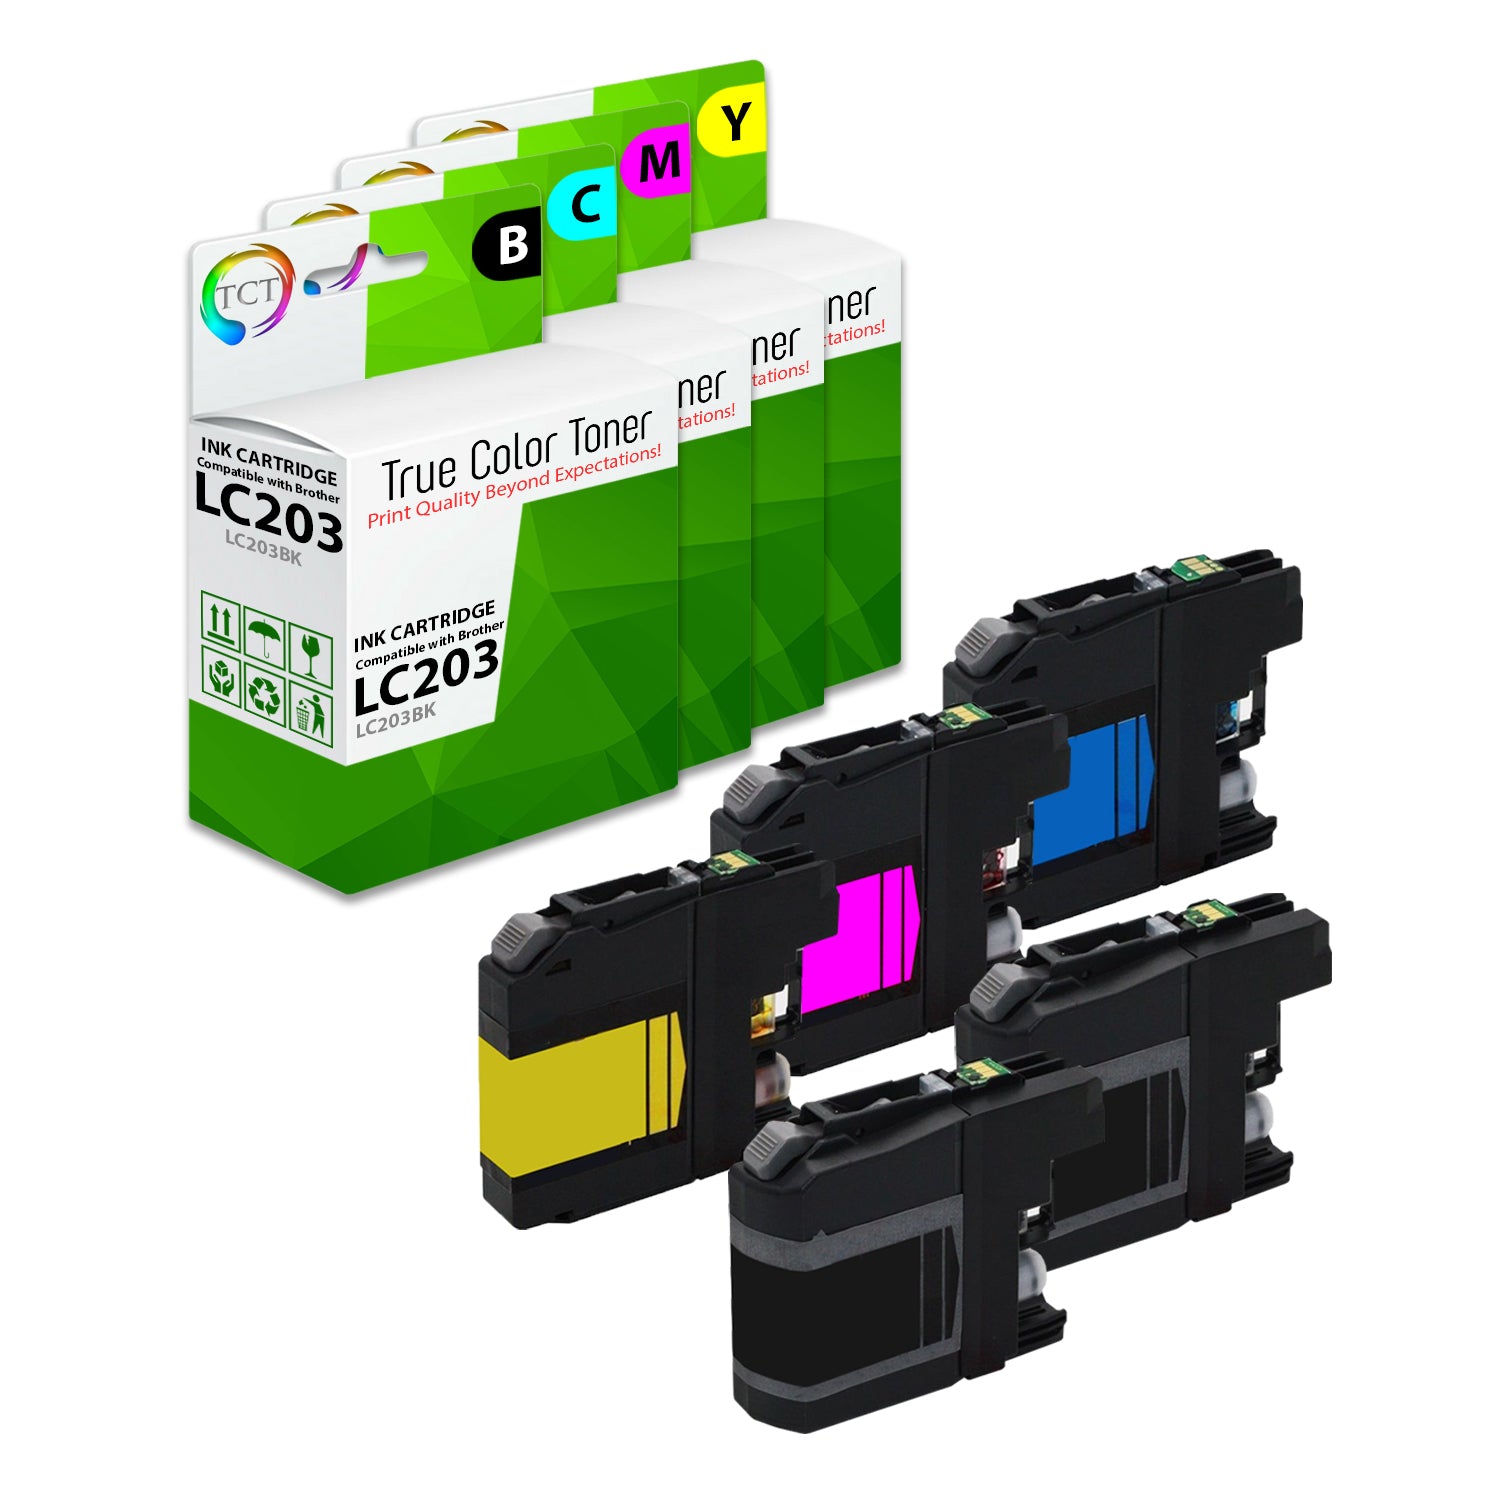 TCT Compatible Ink Cartridge Replacement for the Brother LC203 Series - 5 Pack (B, C, M, Y)